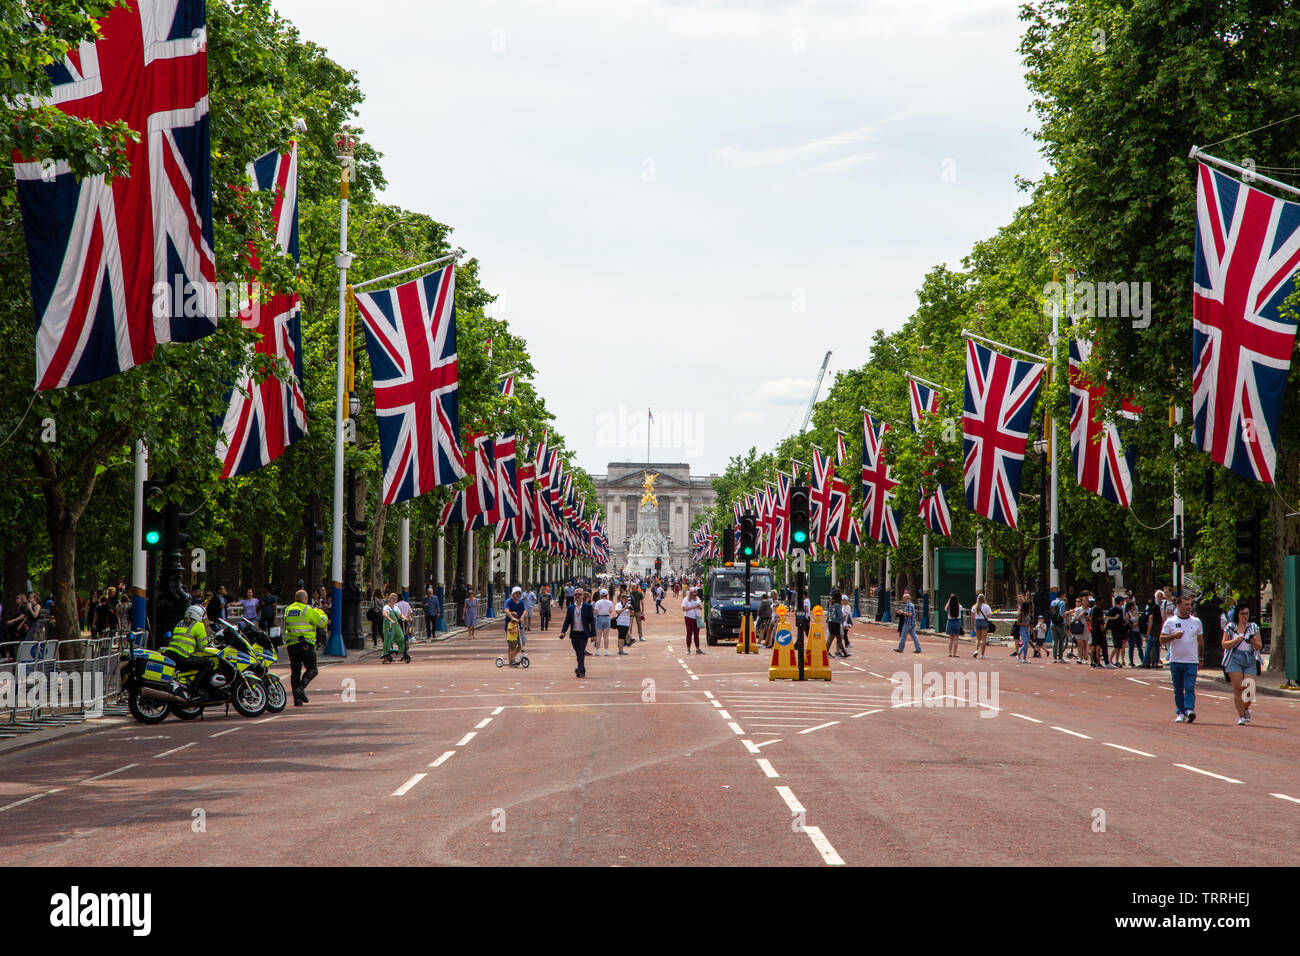 London, England, UK - June 1, 2019: Union Jack flags fly along The Mall ahead of a ceremonial event in central London, while crowds of tourists walk o Stock Photo